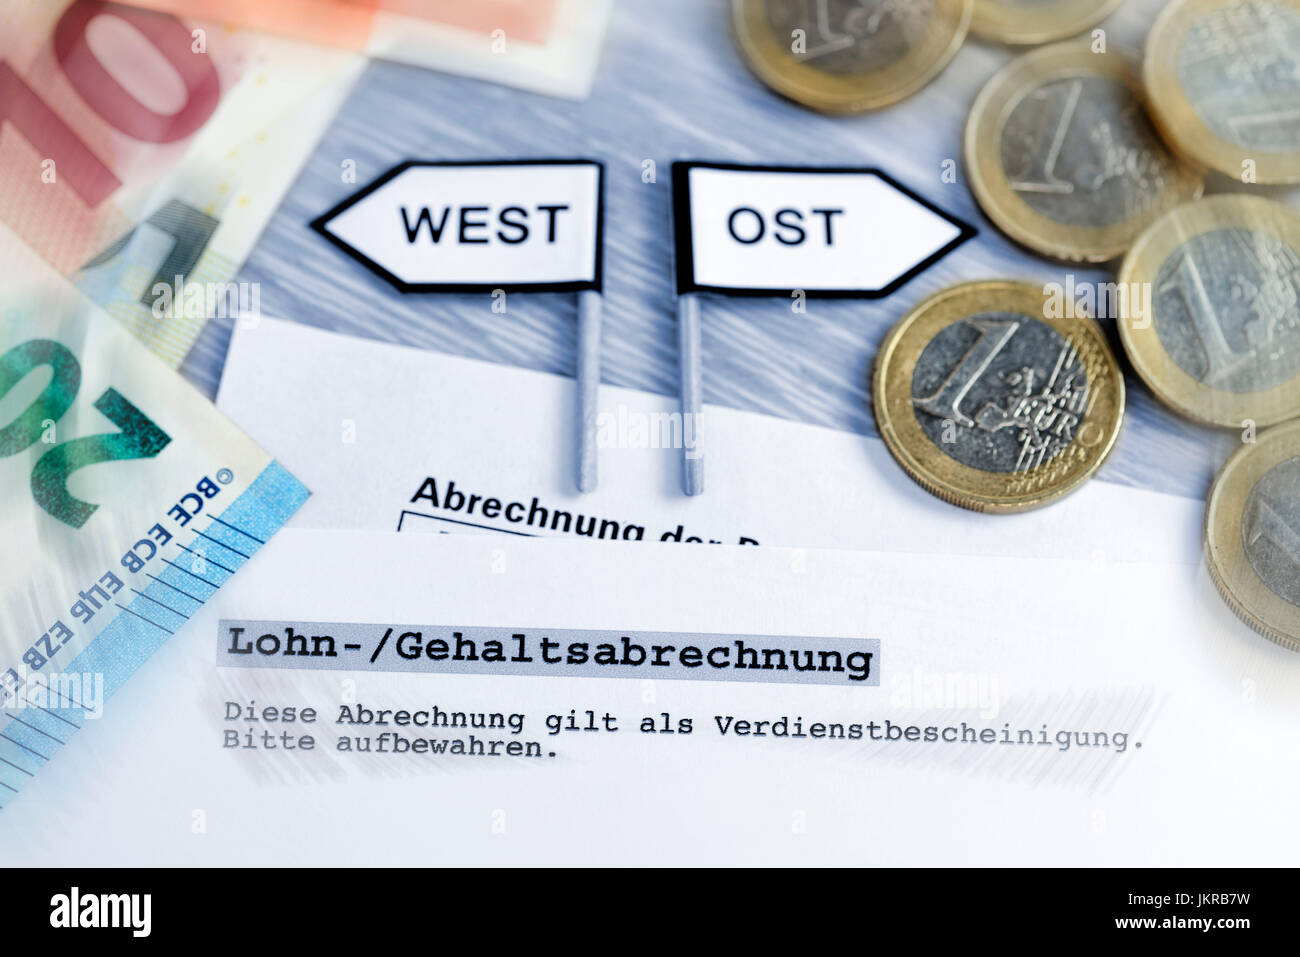 Signpost west and the east with bank notes and monetary coins, unequal salaries in west country and Eastern Germany, Wegweiser West und Ost mit Geldsc Stock Photo